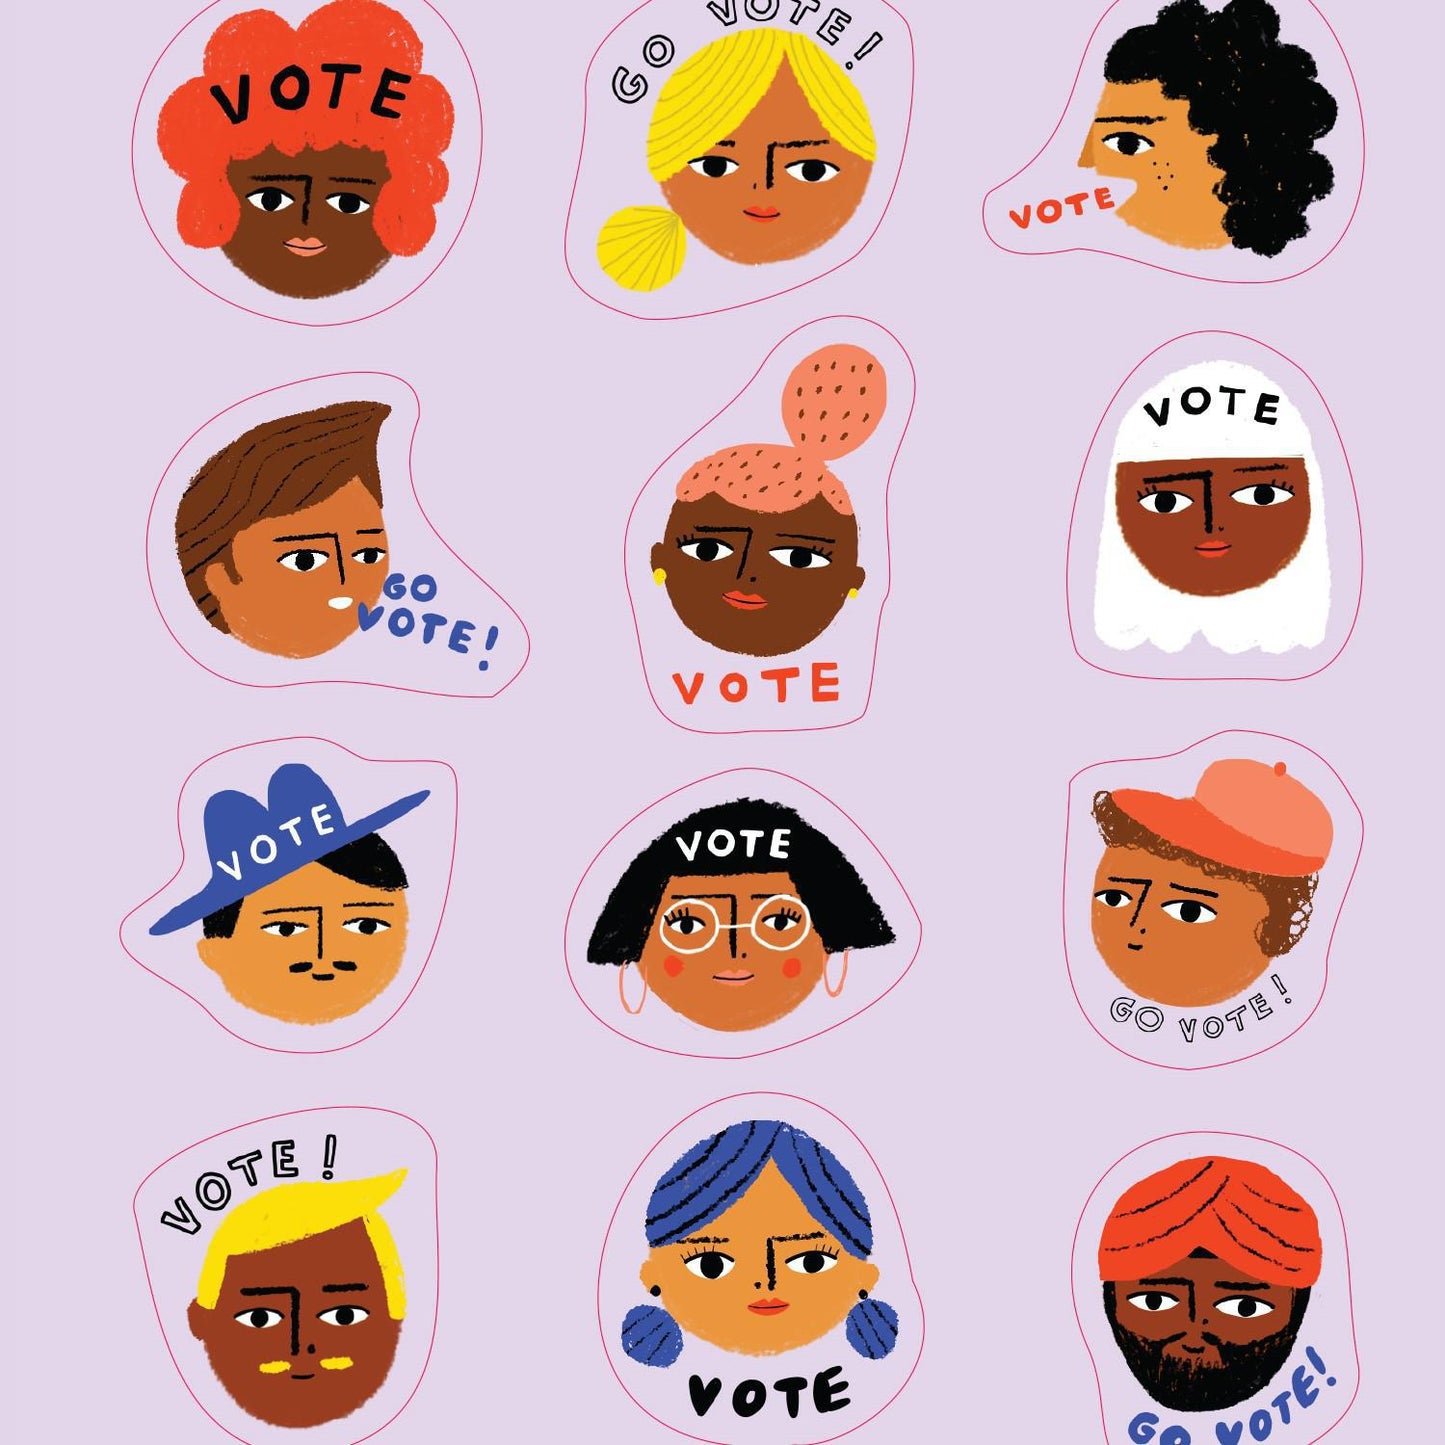 Sticker Book - Be a Voter!